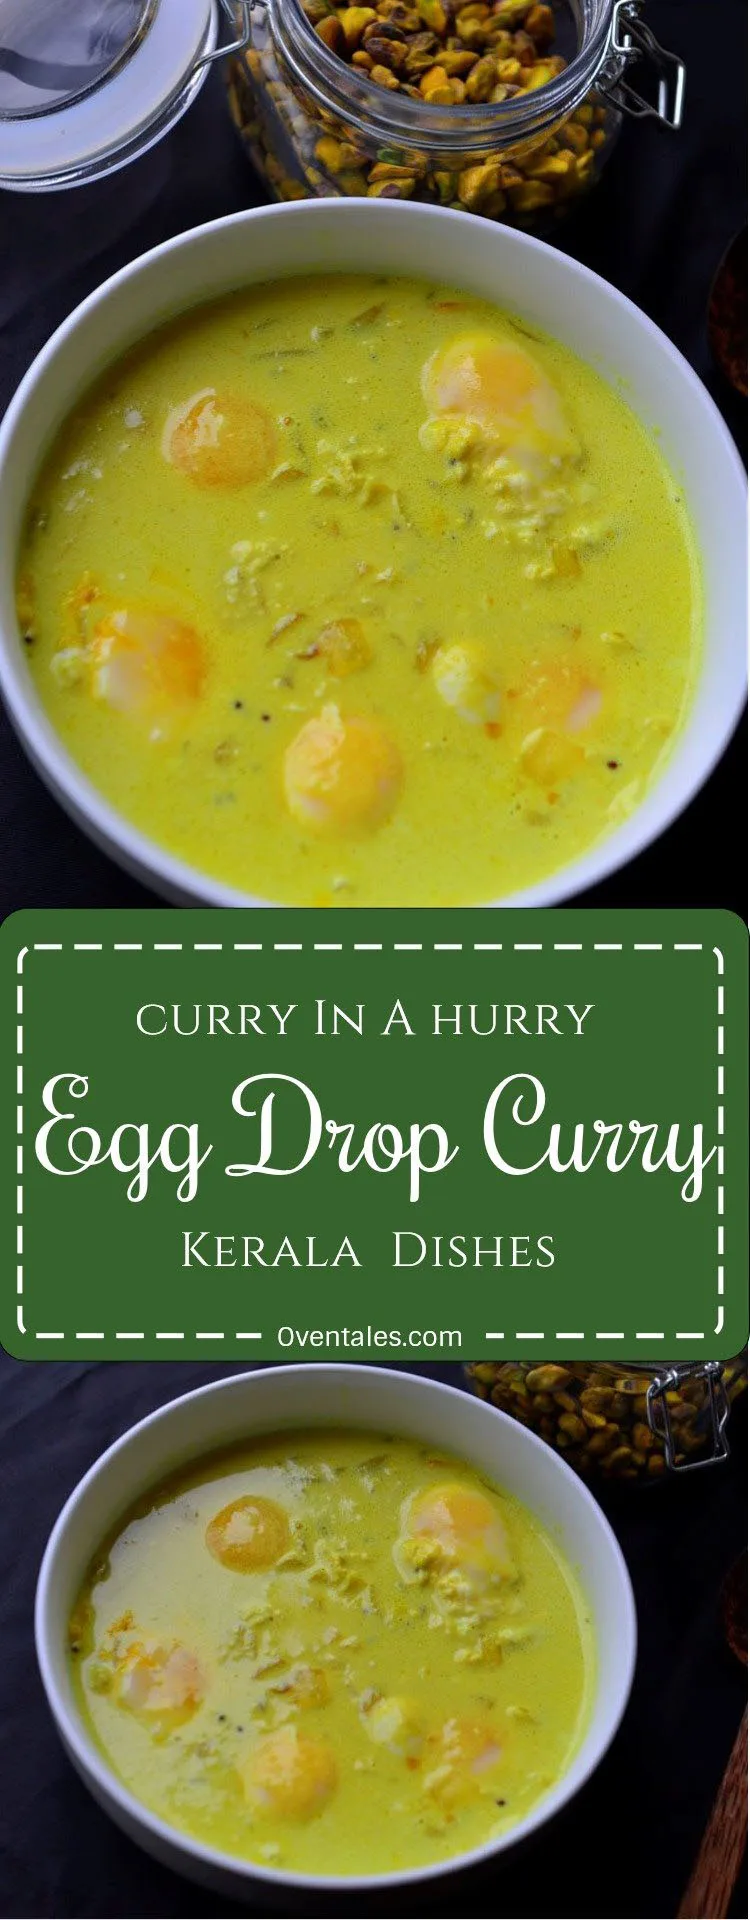 Egg Drop Curry